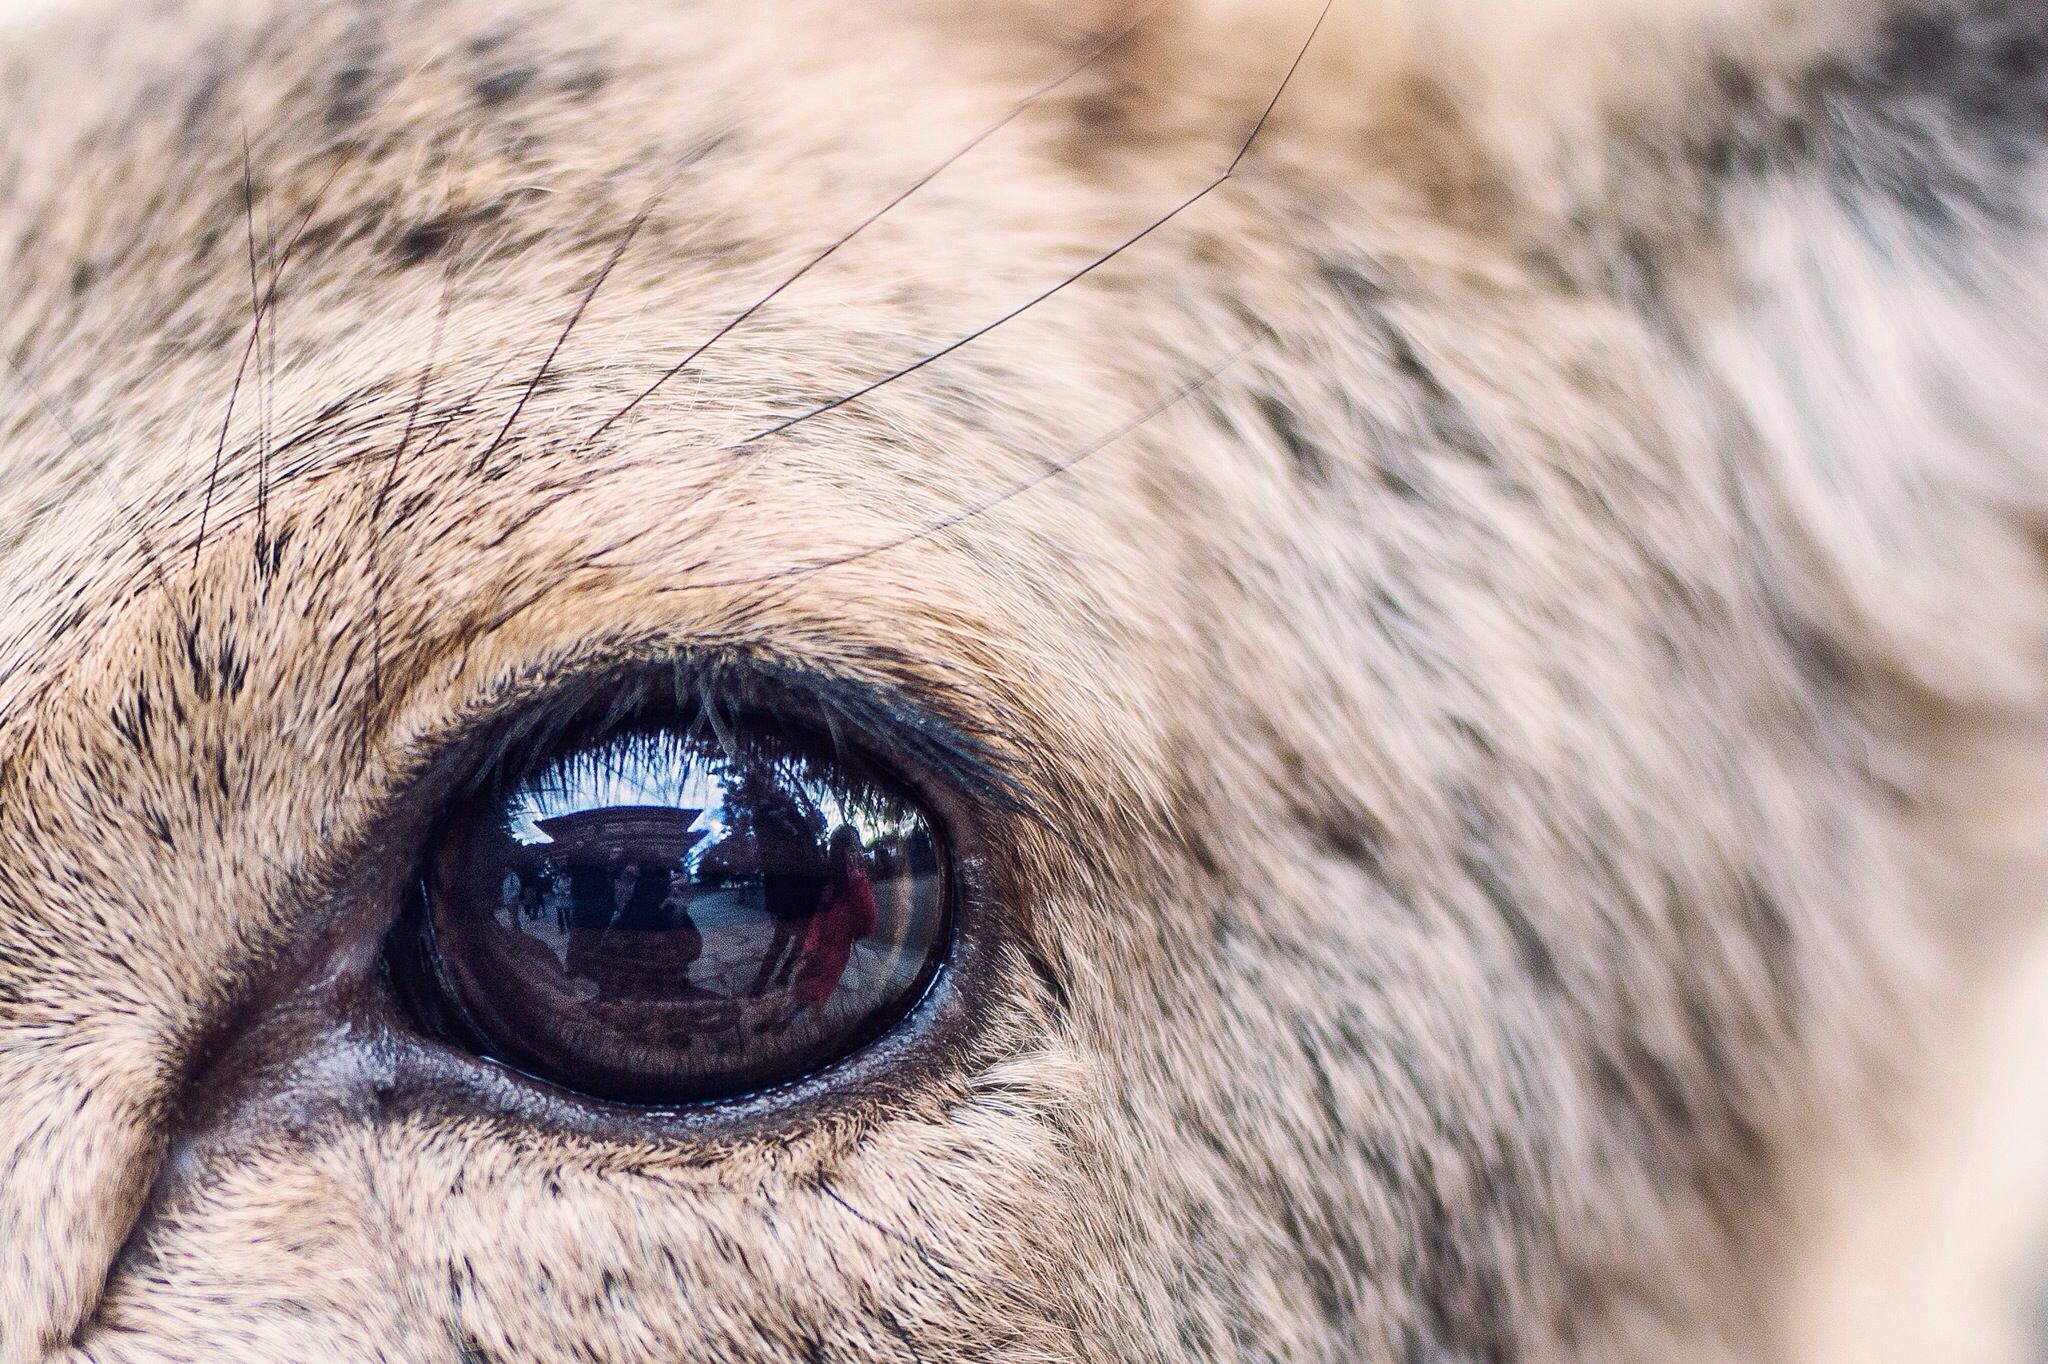 close-up, one animal, part of, animal eye, animal body part, animal head, domestic animals, animal themes, human eye, extreme close up, mammal, portrait, one person, looking at camera, extreme close-up, eyesight, cropped, horse, detail